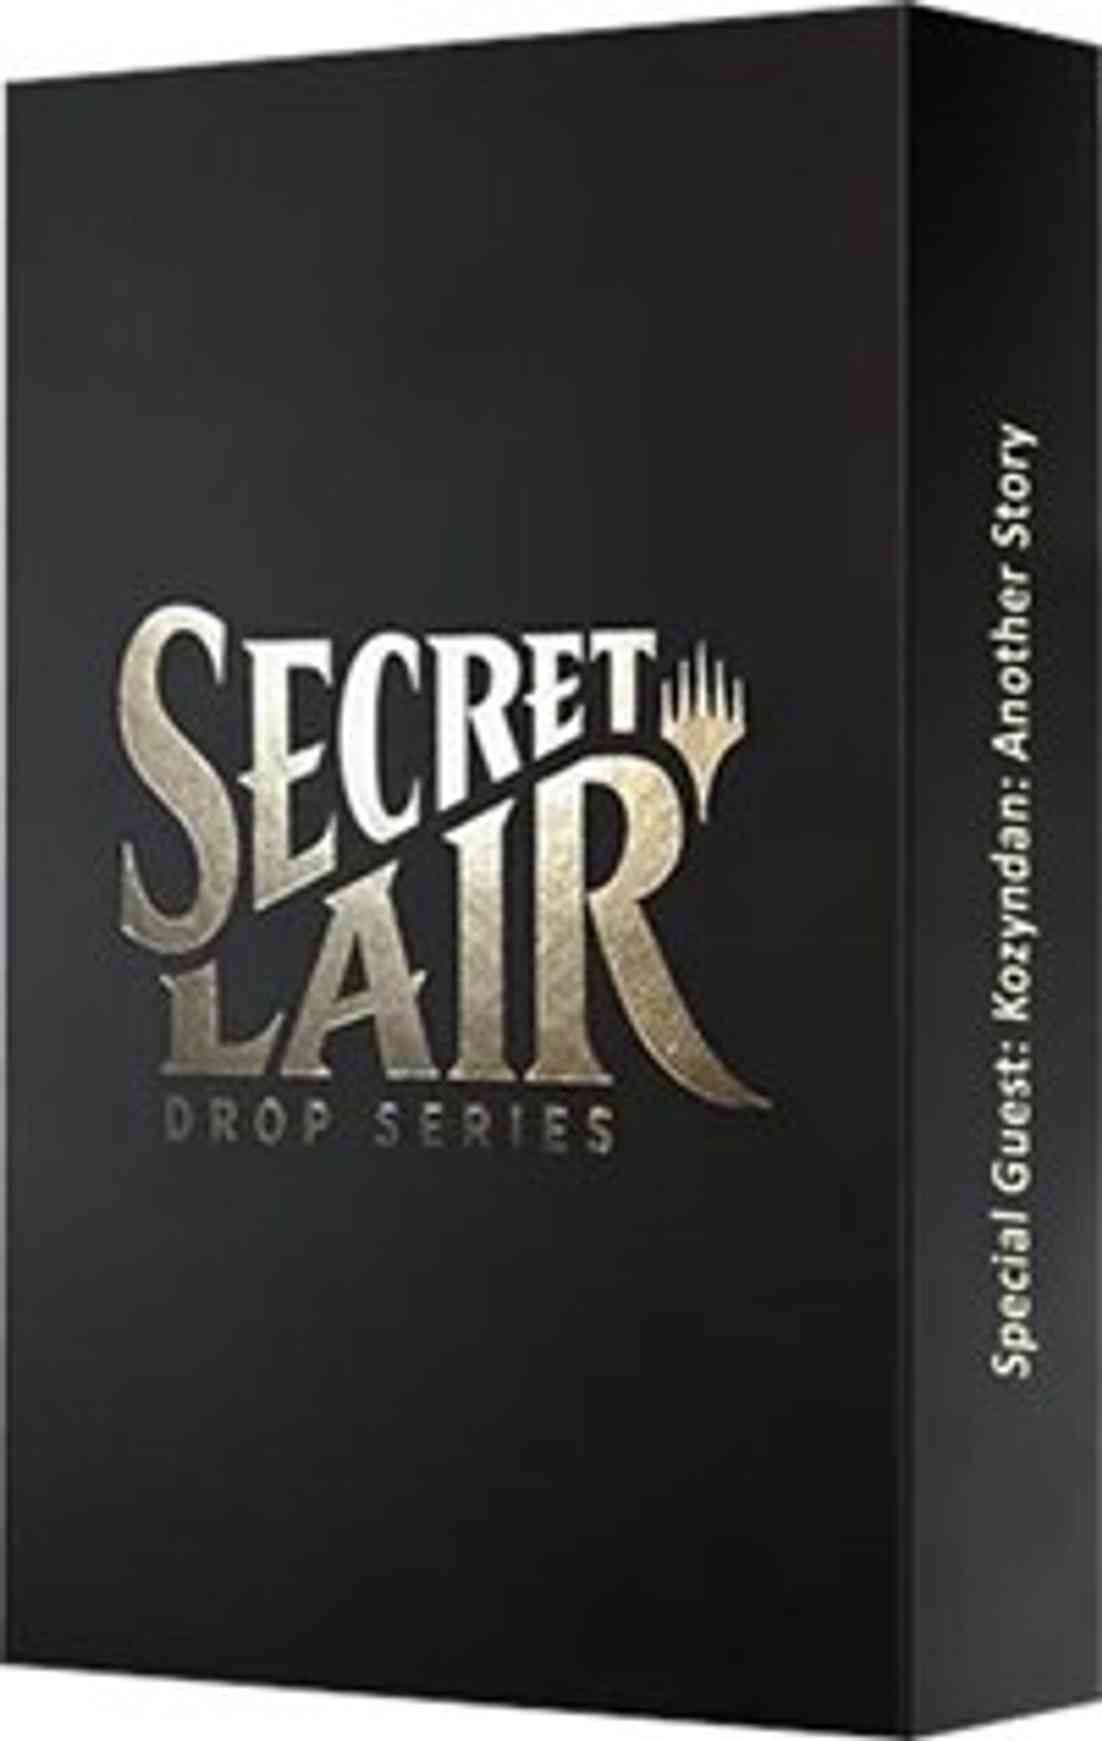 Secret Lair Drop: Special Guest: Kozyndan: Another Story magic card front